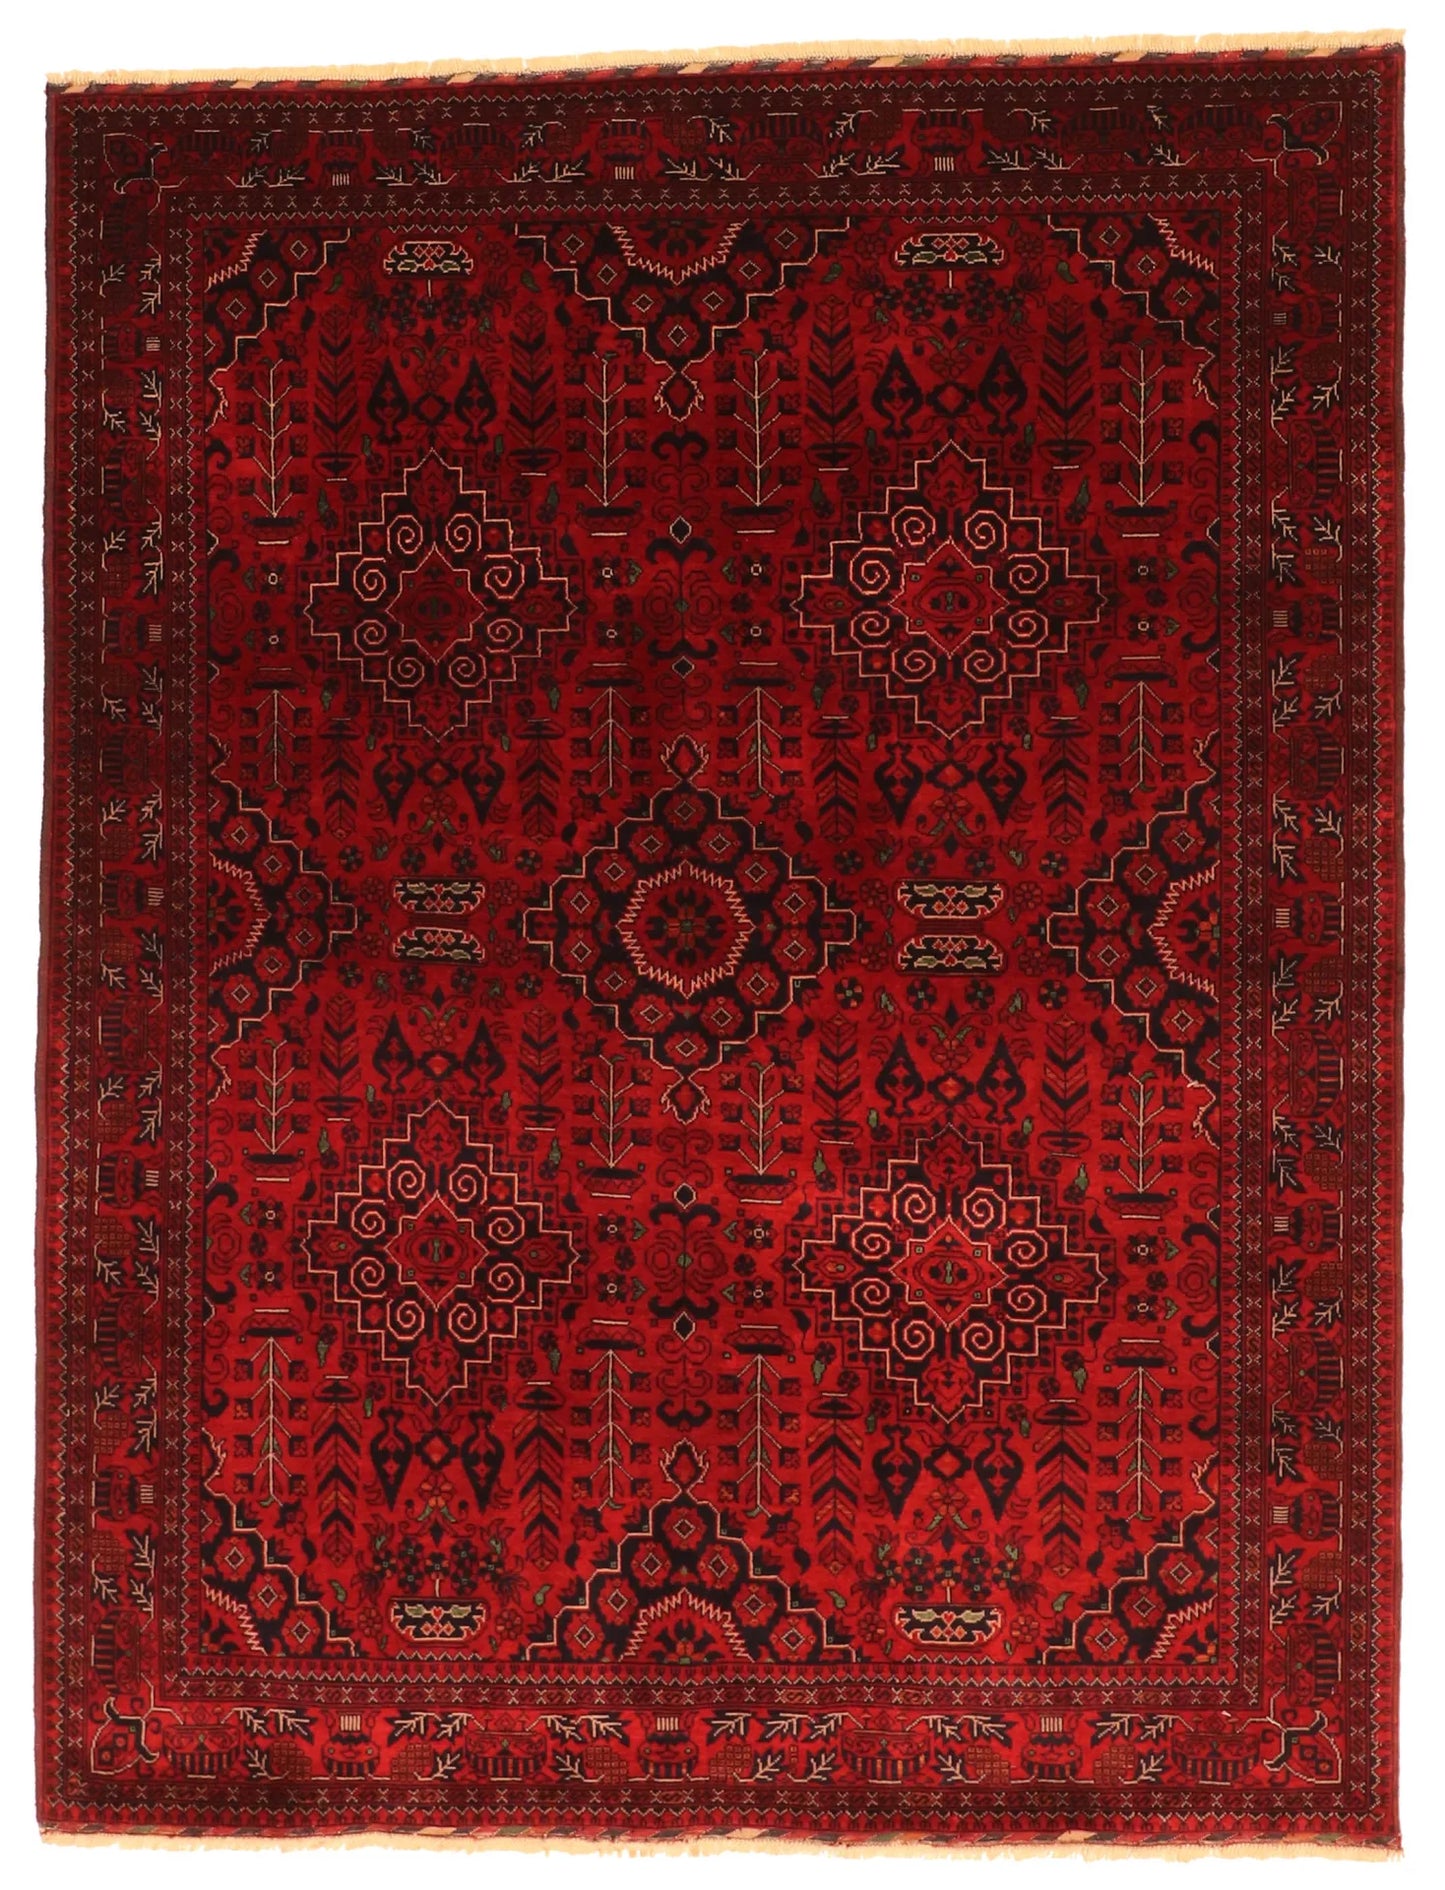 5x7 - Khan Mohamadie Fine/Wool All Over Rectangle - Hand Knotted Rug